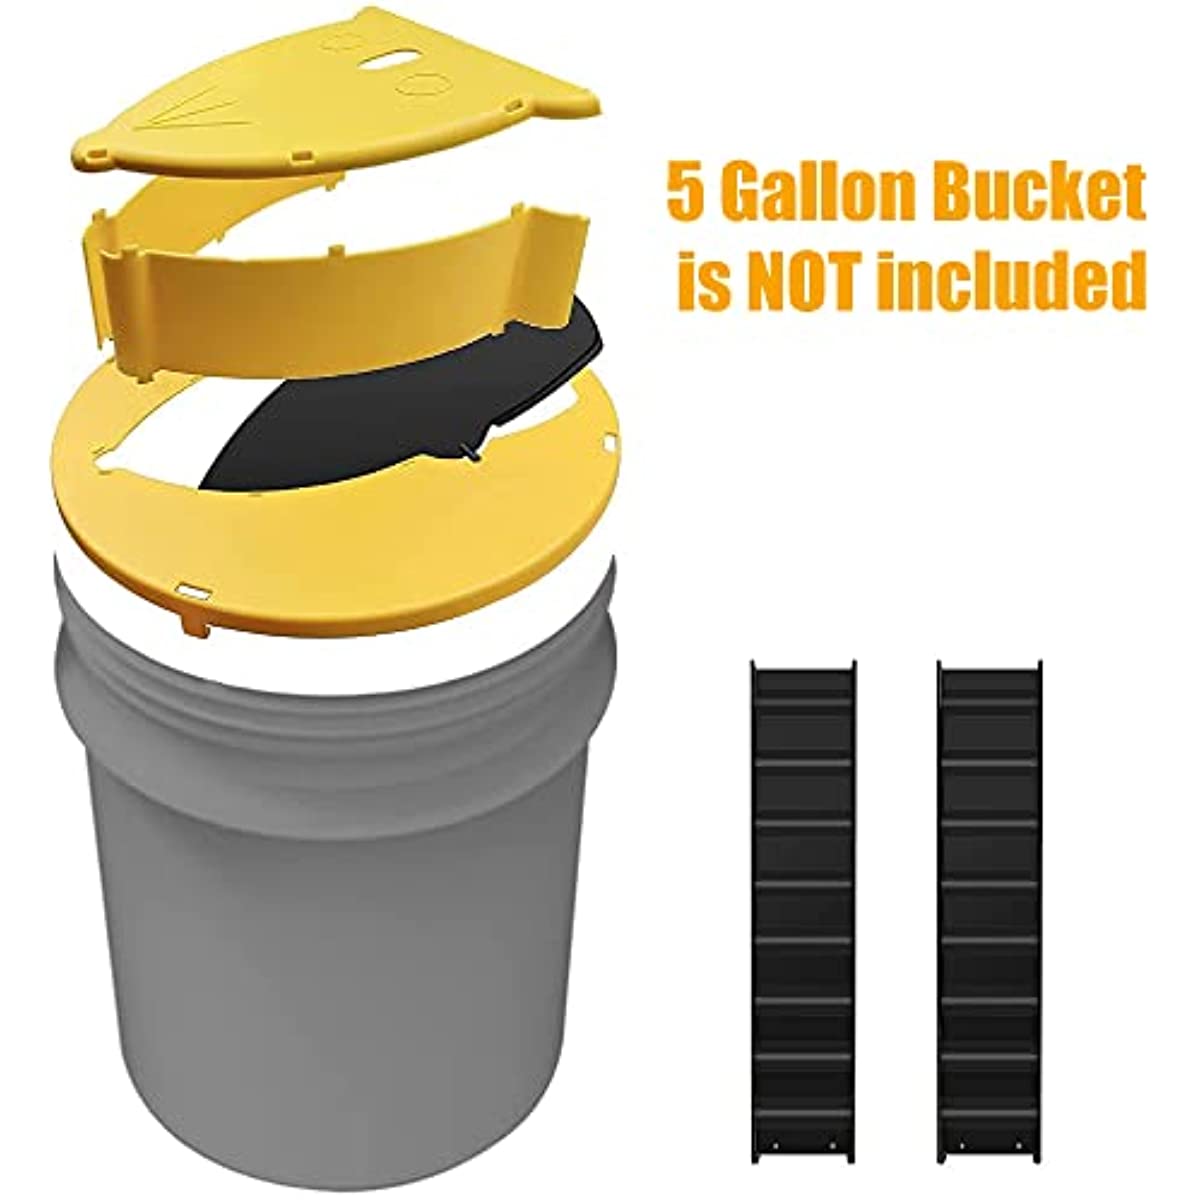  RinneTraps - Flip N Slide Bucket Lid Mouse Trap, Humane or  Lethal, Trap Door Style, Multi Catch, Auto Reset, Indoor Outdoor, No See Kill, 5  Gallon Bucket Compatible